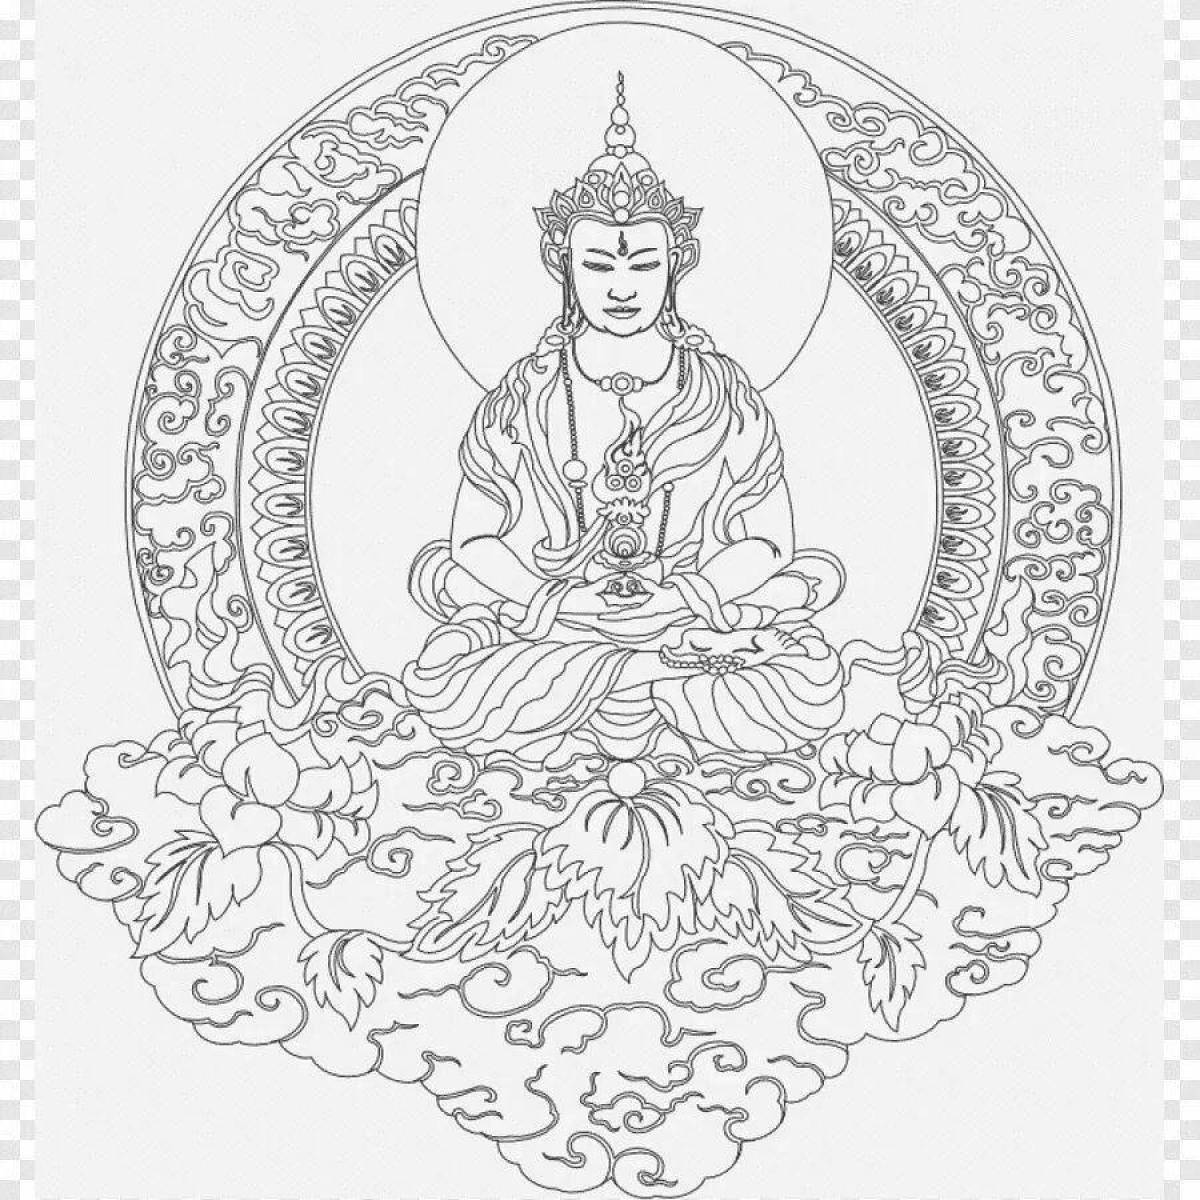 Grand Buddhism coloring book